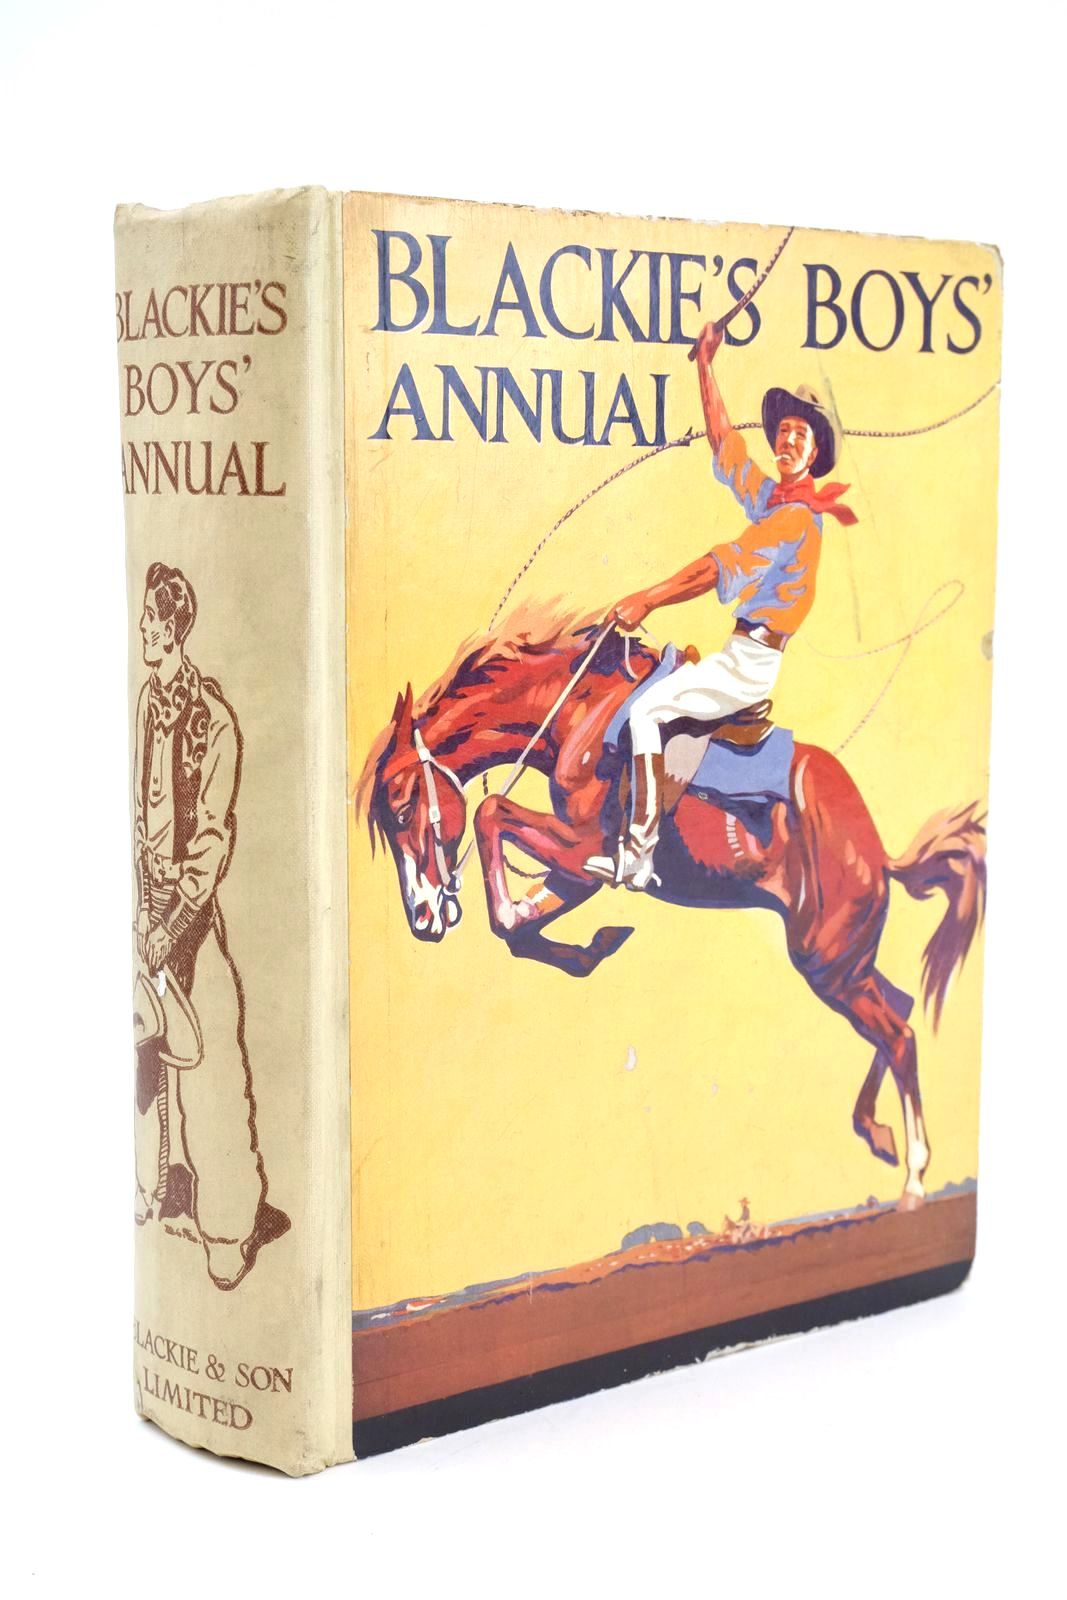 Photo of BLACKIE'S BOYS' ANNUAL written by Havilton, Jeffrey
Westerman, Percy F.
Prout, Geoffrey
et al, illustrated by Brock, H.M.
Cleaver, Reginald
Hilder, Rowland
et al., published by Blackie & Son Ltd. (STOCK CODE: 1324973)  for sale by Stella & Rose's Books